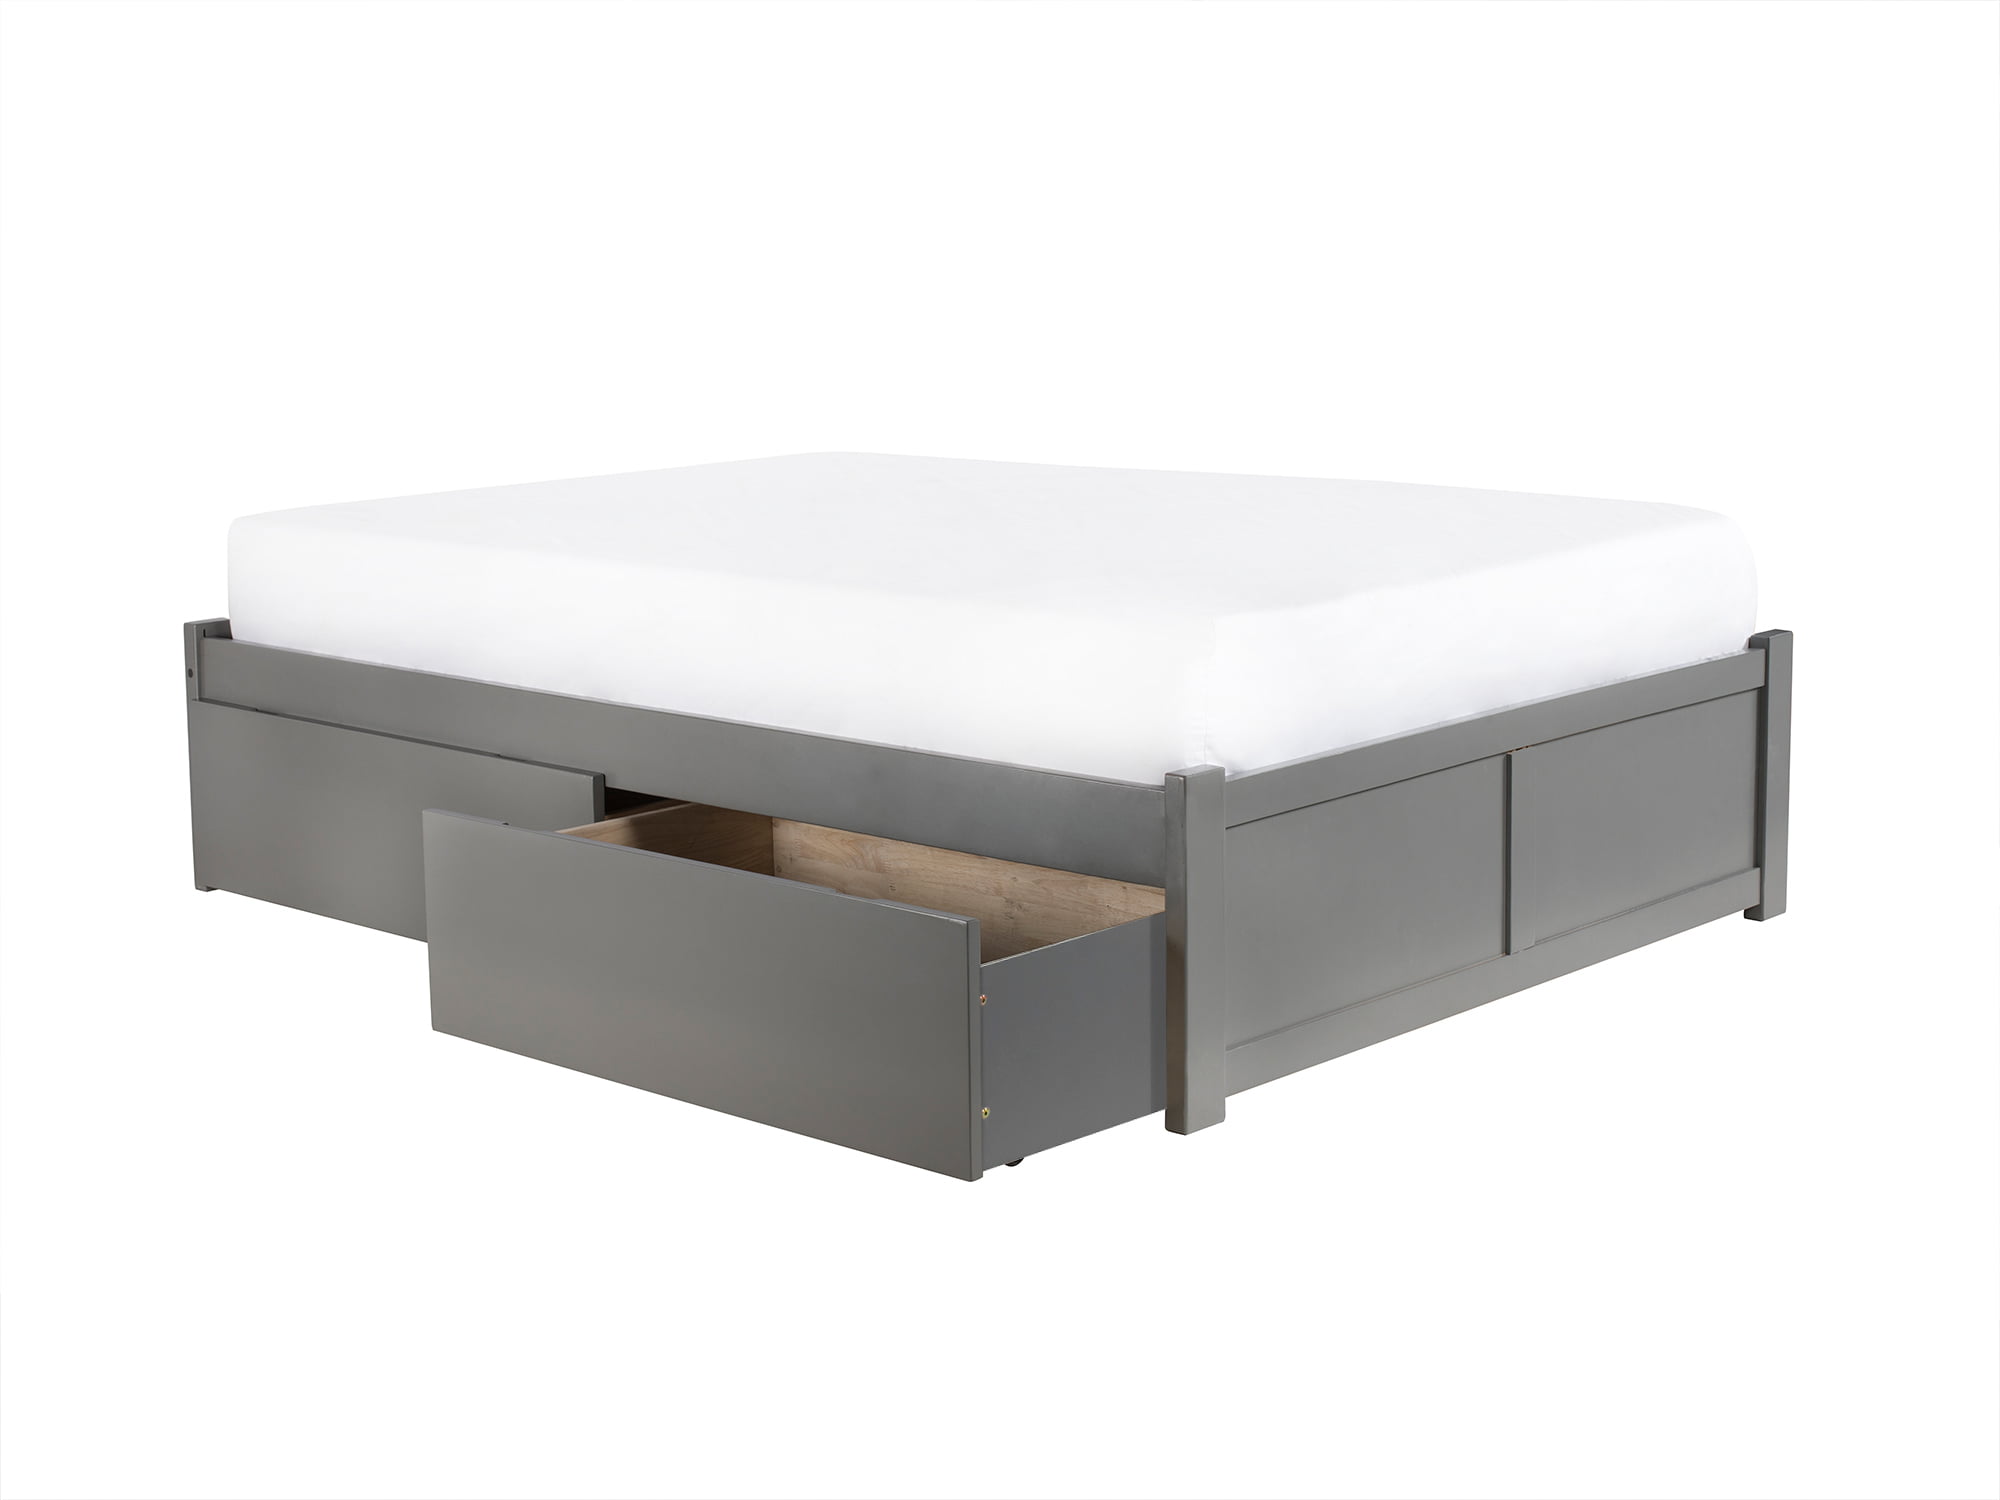 Picture of Atlantic Furniture AR8052119 Concord King Platform Bed with Flat Panel Foot Board & 2 Urban Bed Drawers - Grey